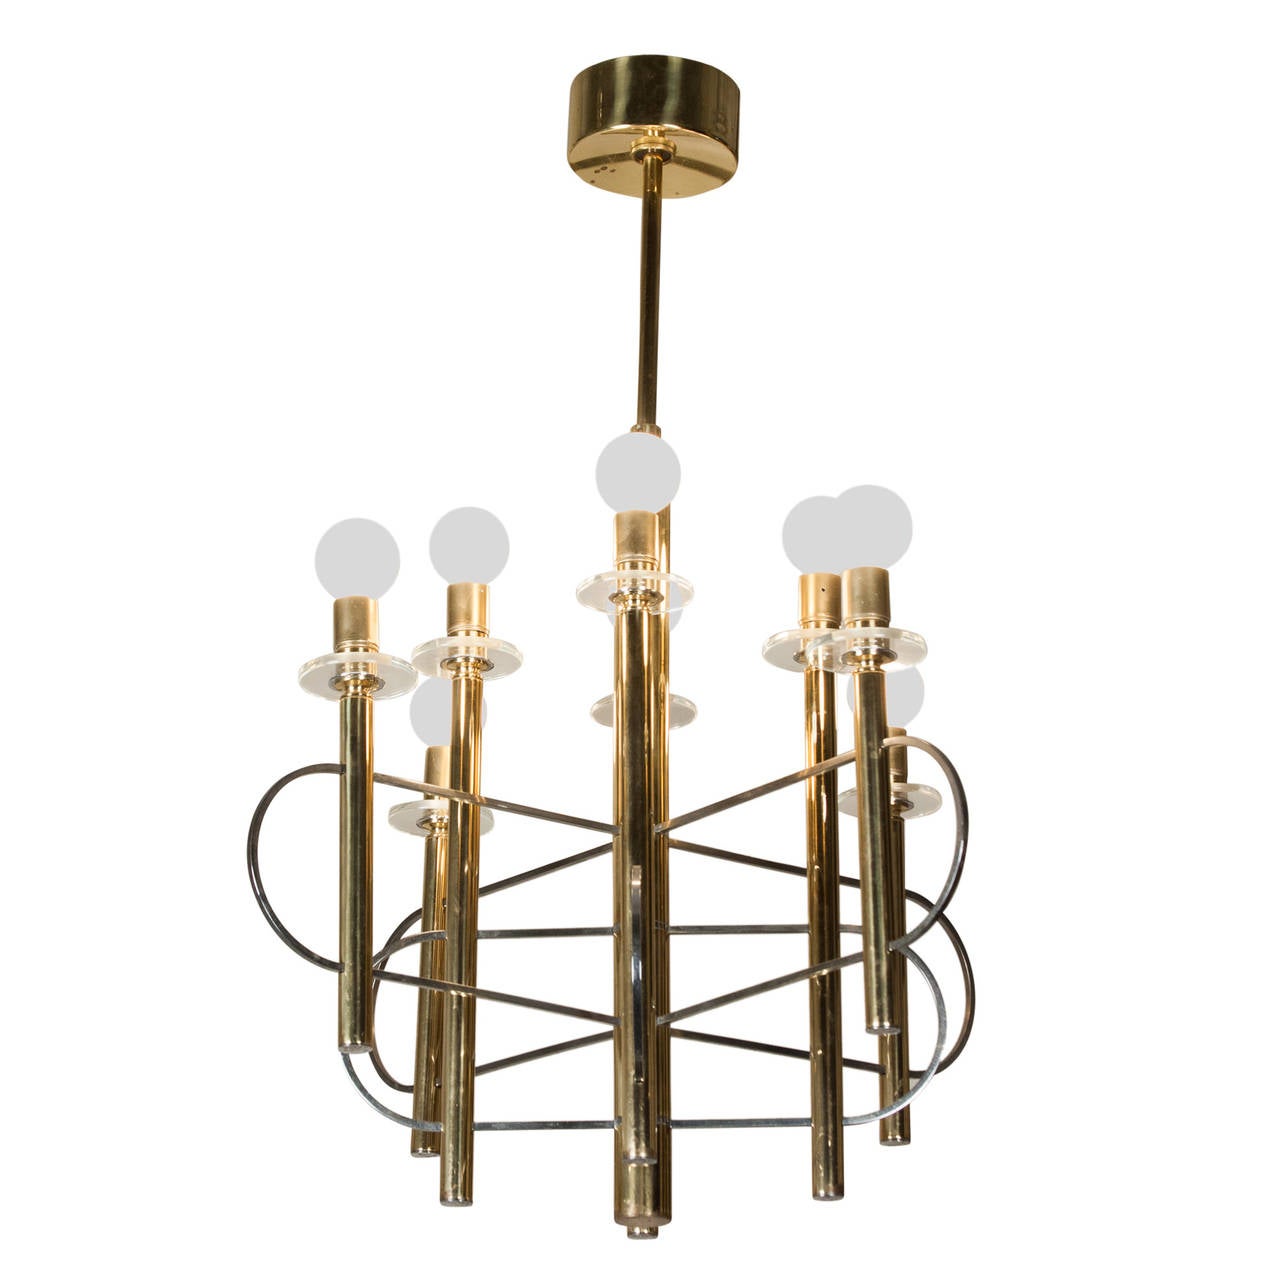 Chrome, brass and lucite eight light chandelier, eight brass posts connected by looping chrome elements, with lucite bobeches, by Gaetoano Sciolari, Italian, 1960s. Diameter of fixture 23 in, overall height 29 1/2 in, height to top of bulbs 18 in.